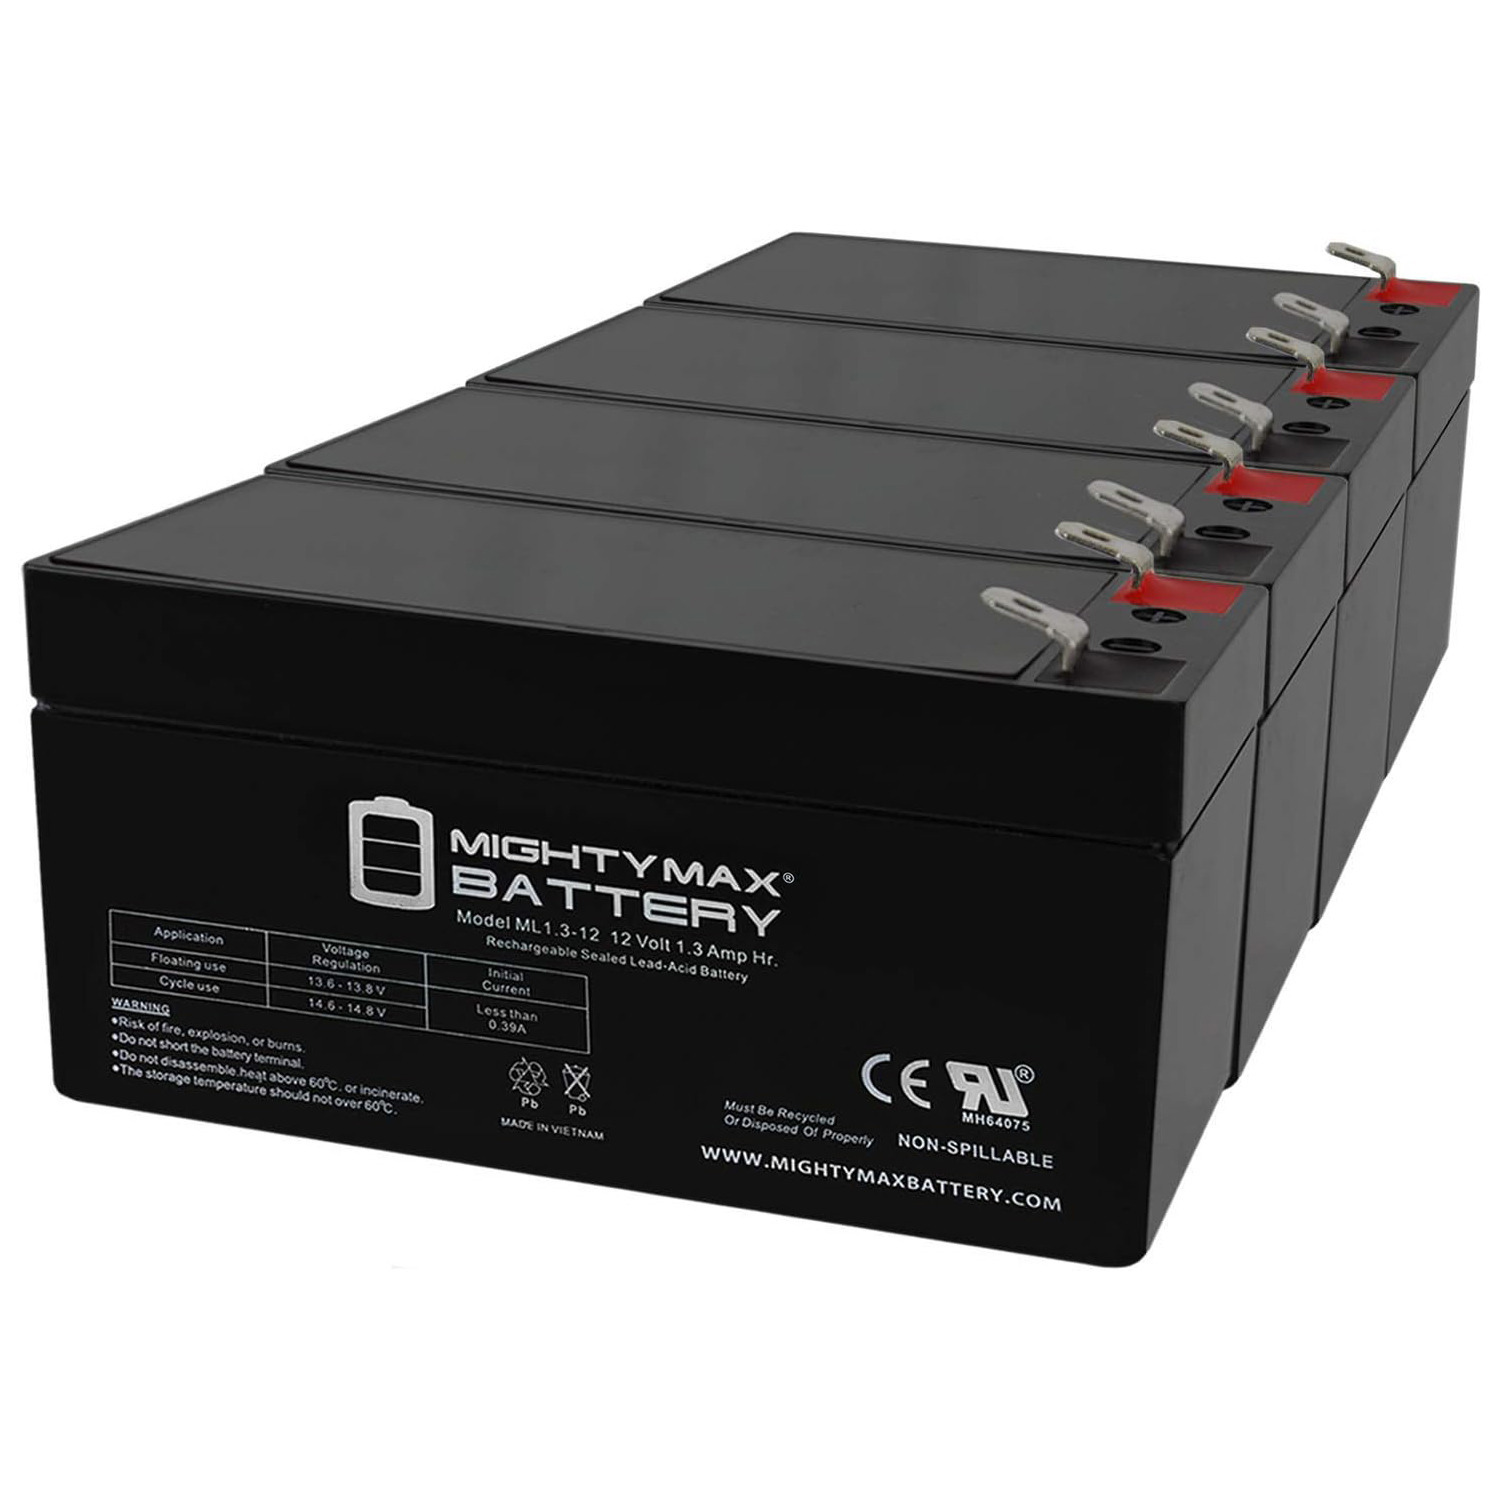 12V 1.3Ah Replacement Battery for MHB MS1.3-12 - 4 Pack